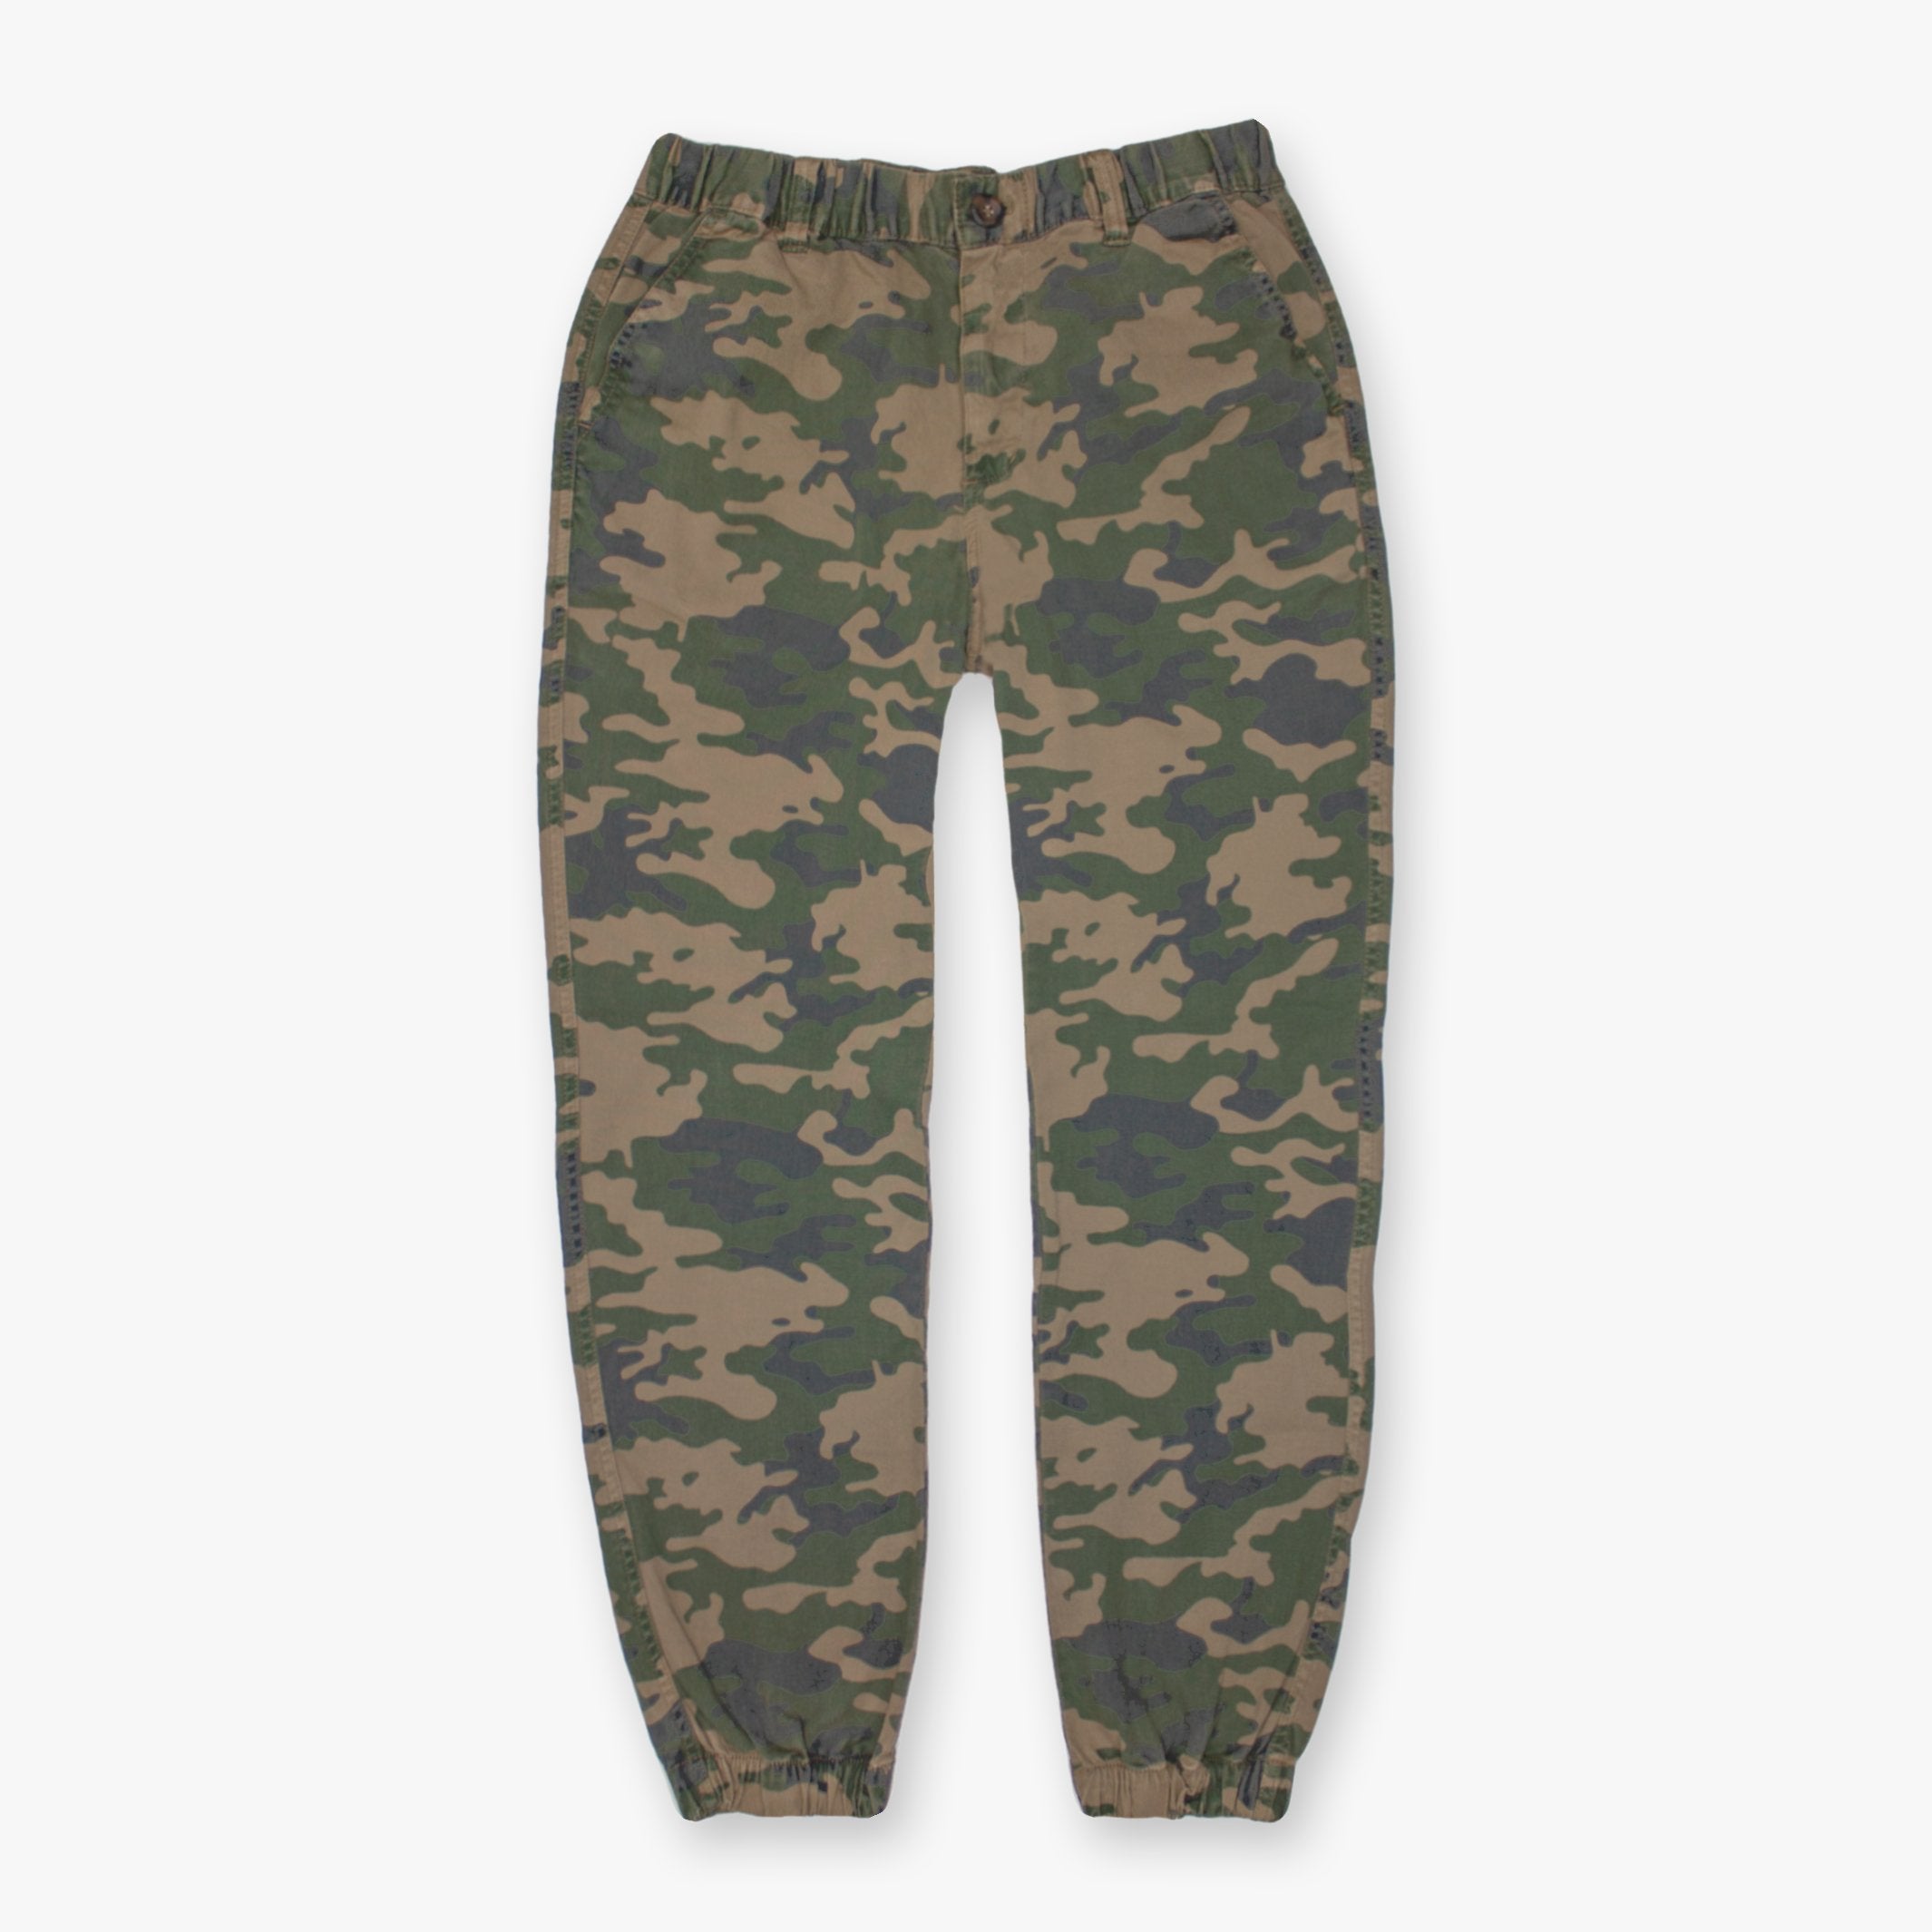 Stretch Jogger Woodland Camo with belt loops, elastic waistband, zipper fly, ribbed ankle cuff and two inseam pockets